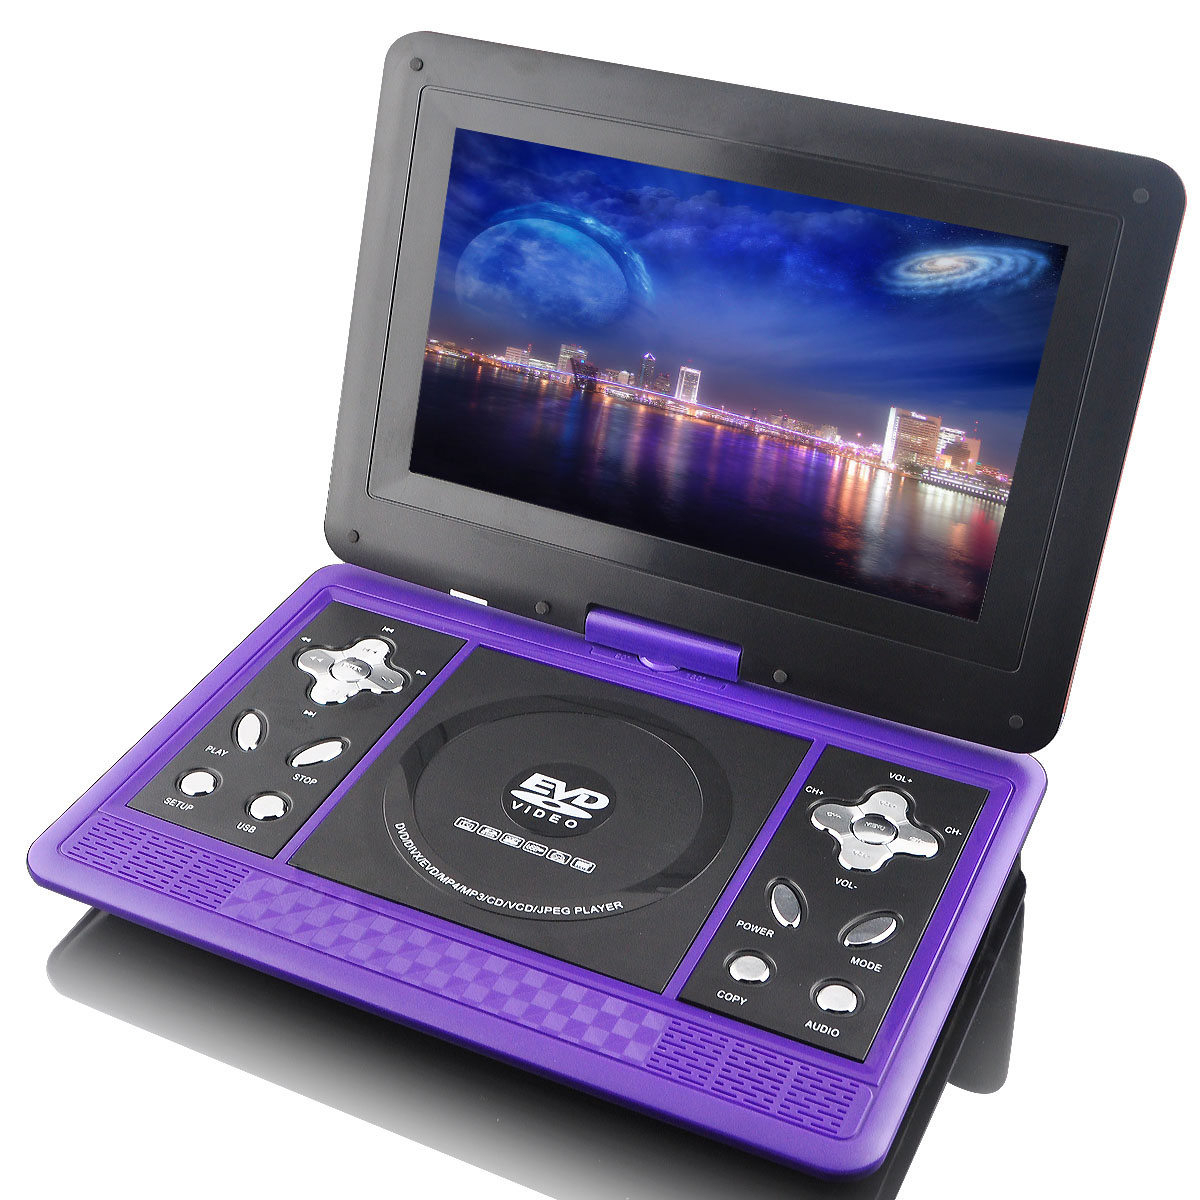 High Definition Portable DVD With Analog TV